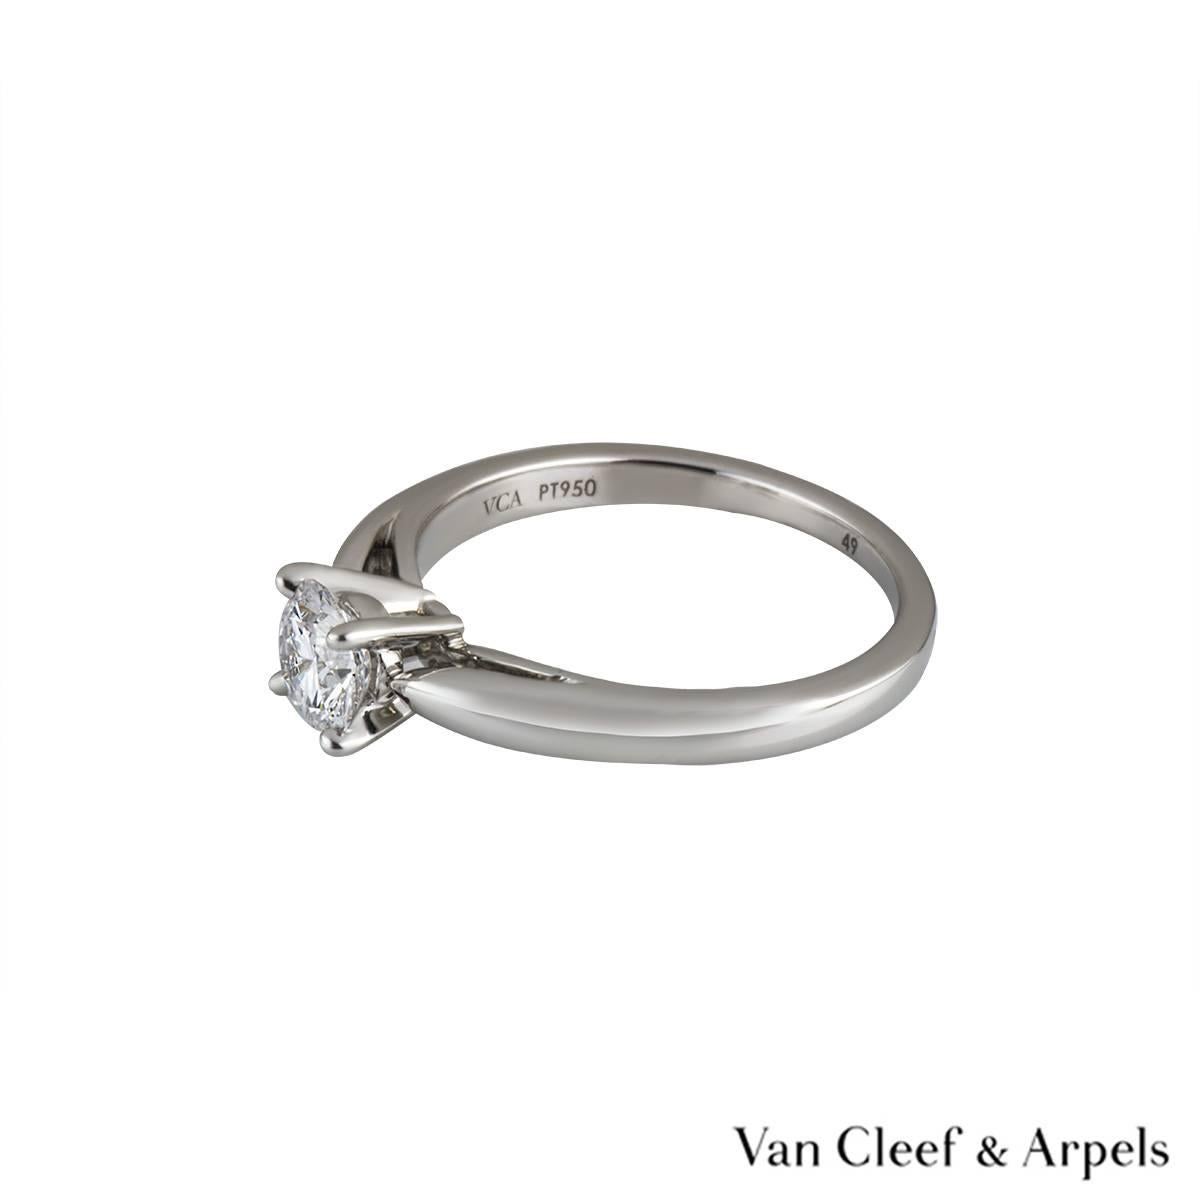 A beautiful diamond single stone ring by Van Cleef & Arpels. The ring is set to the centre with a round brilliant cut diamond weighing 0.50ct, D in colour and VVS2 in clarity in a traditional four claw setting. The diamond scores an excellent rating